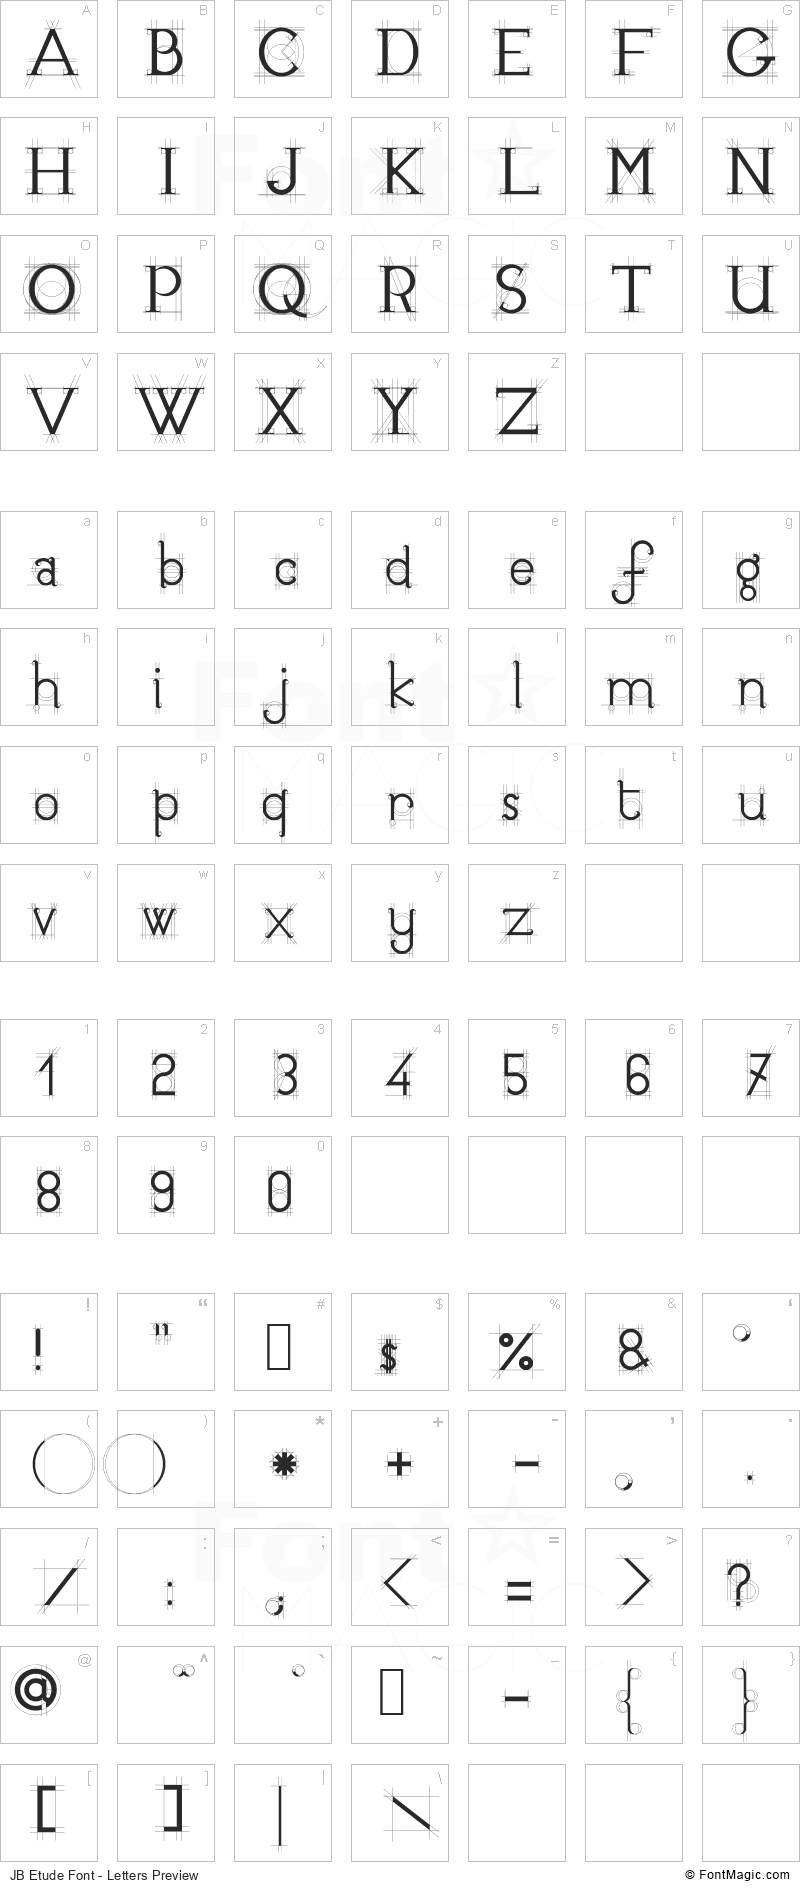 JB Etude Font - All Latters Preview Chart